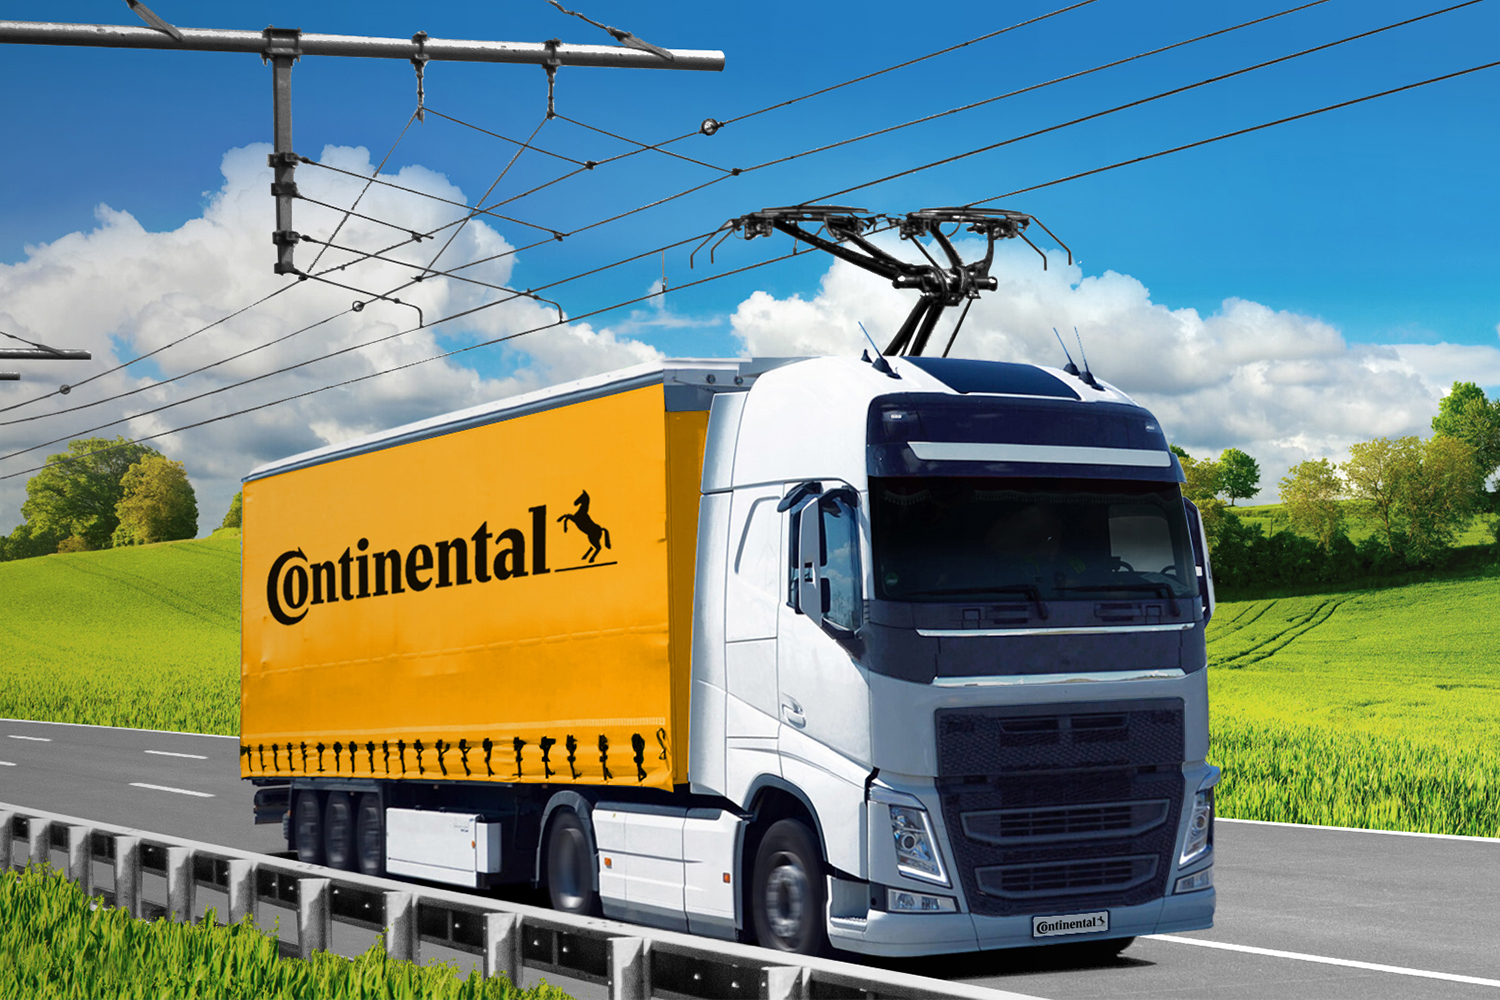 An electric truck on an electrified highway with a pantograph from Siemens and Continental. It could be the future of trucking.